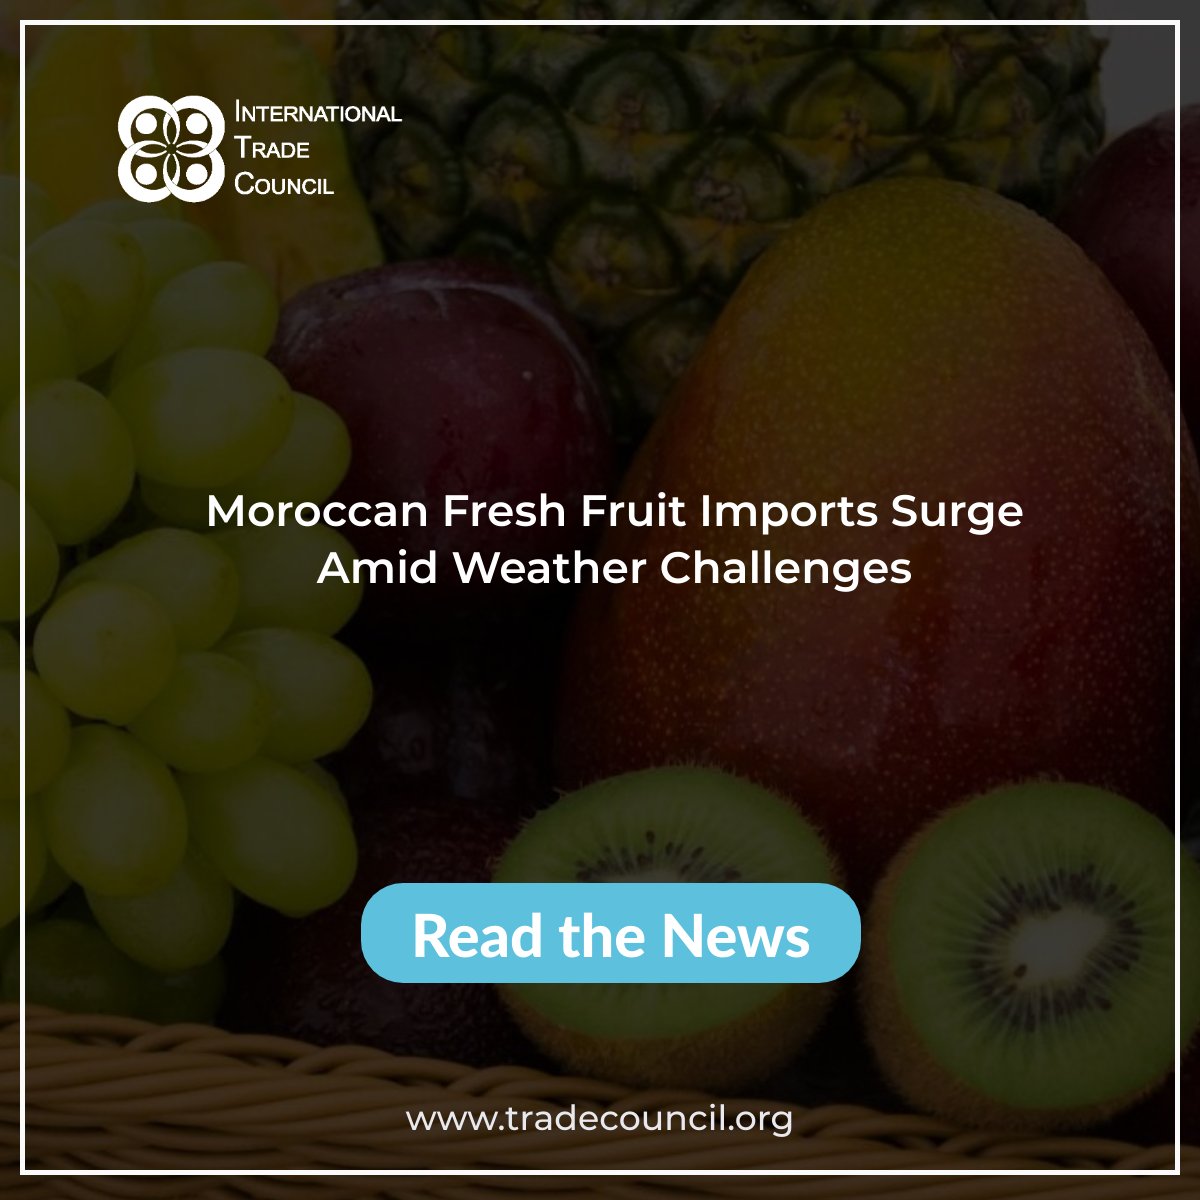 Moroccan Fresh Fruit Imports Surge Amid Weather Challenges
Read The New: tradecouncil.org/moroccan-fresh…
#ITCNewsUpdates #MoroccoImports #FreshFruitTrade #InternationalTrade #SupplyChainResilience #NewsUpdate